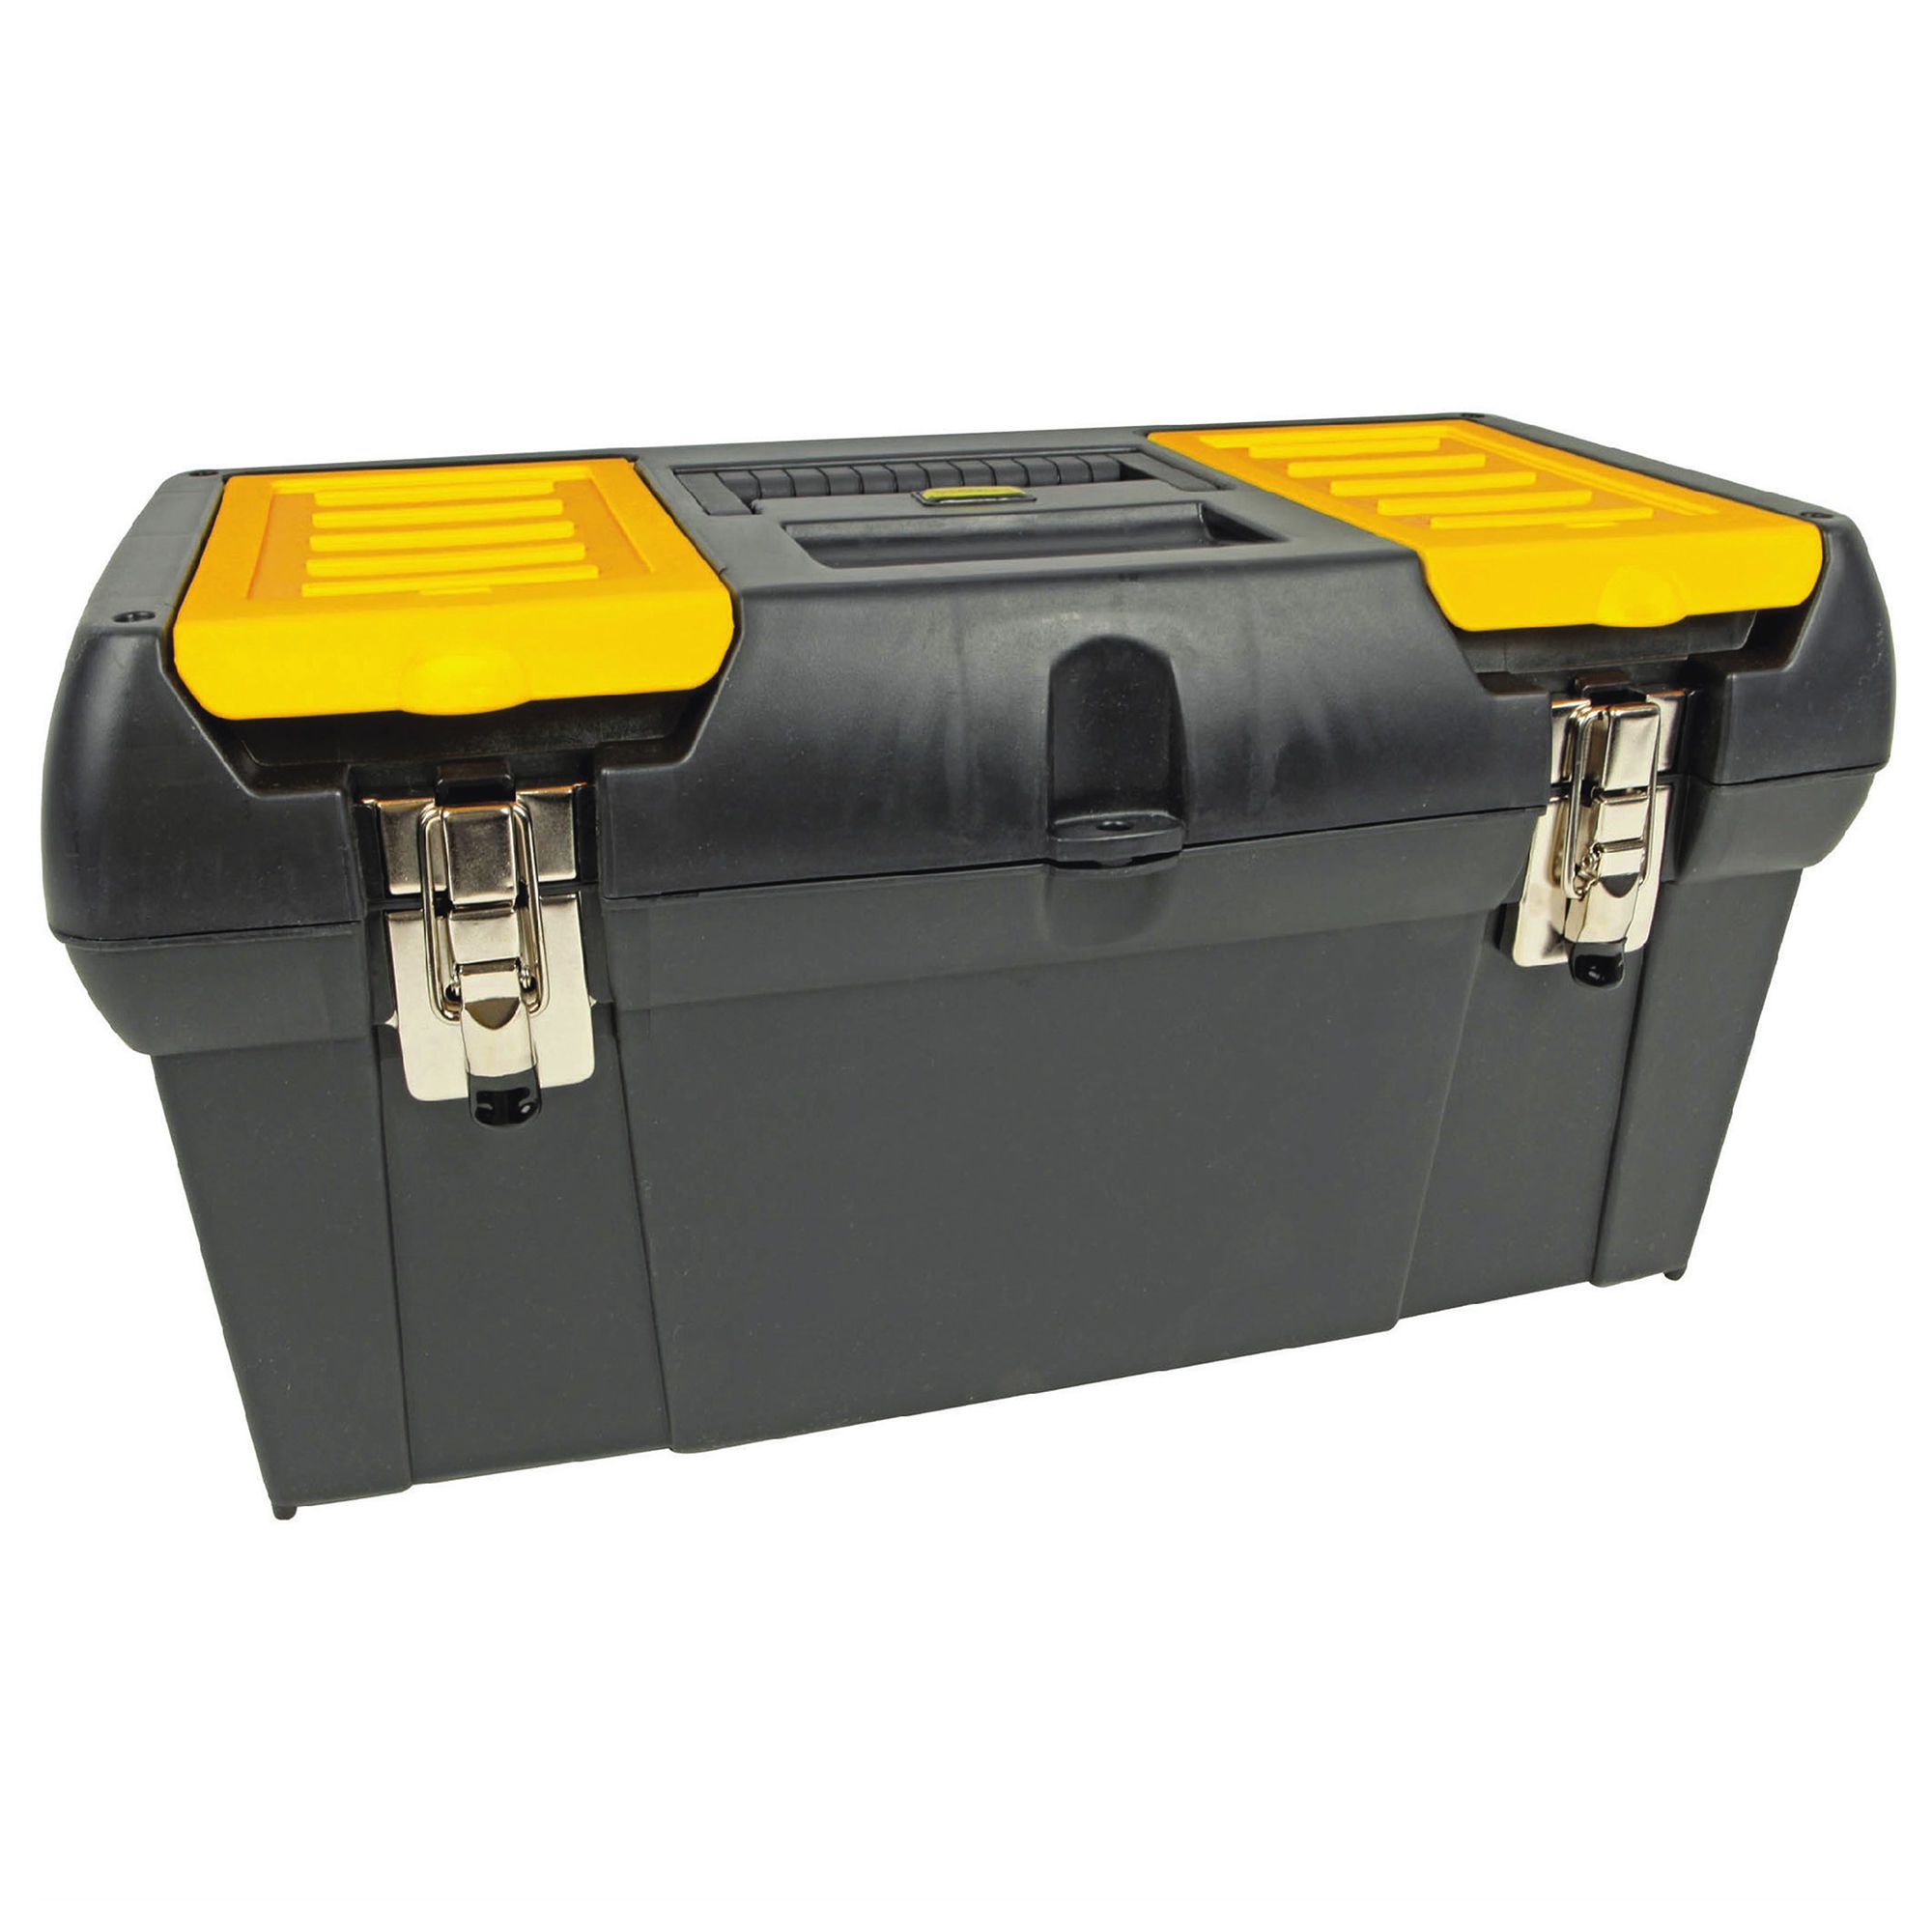 Tool Box with Tray - Series 2000 - 18 1/4 - Black and Yellow from